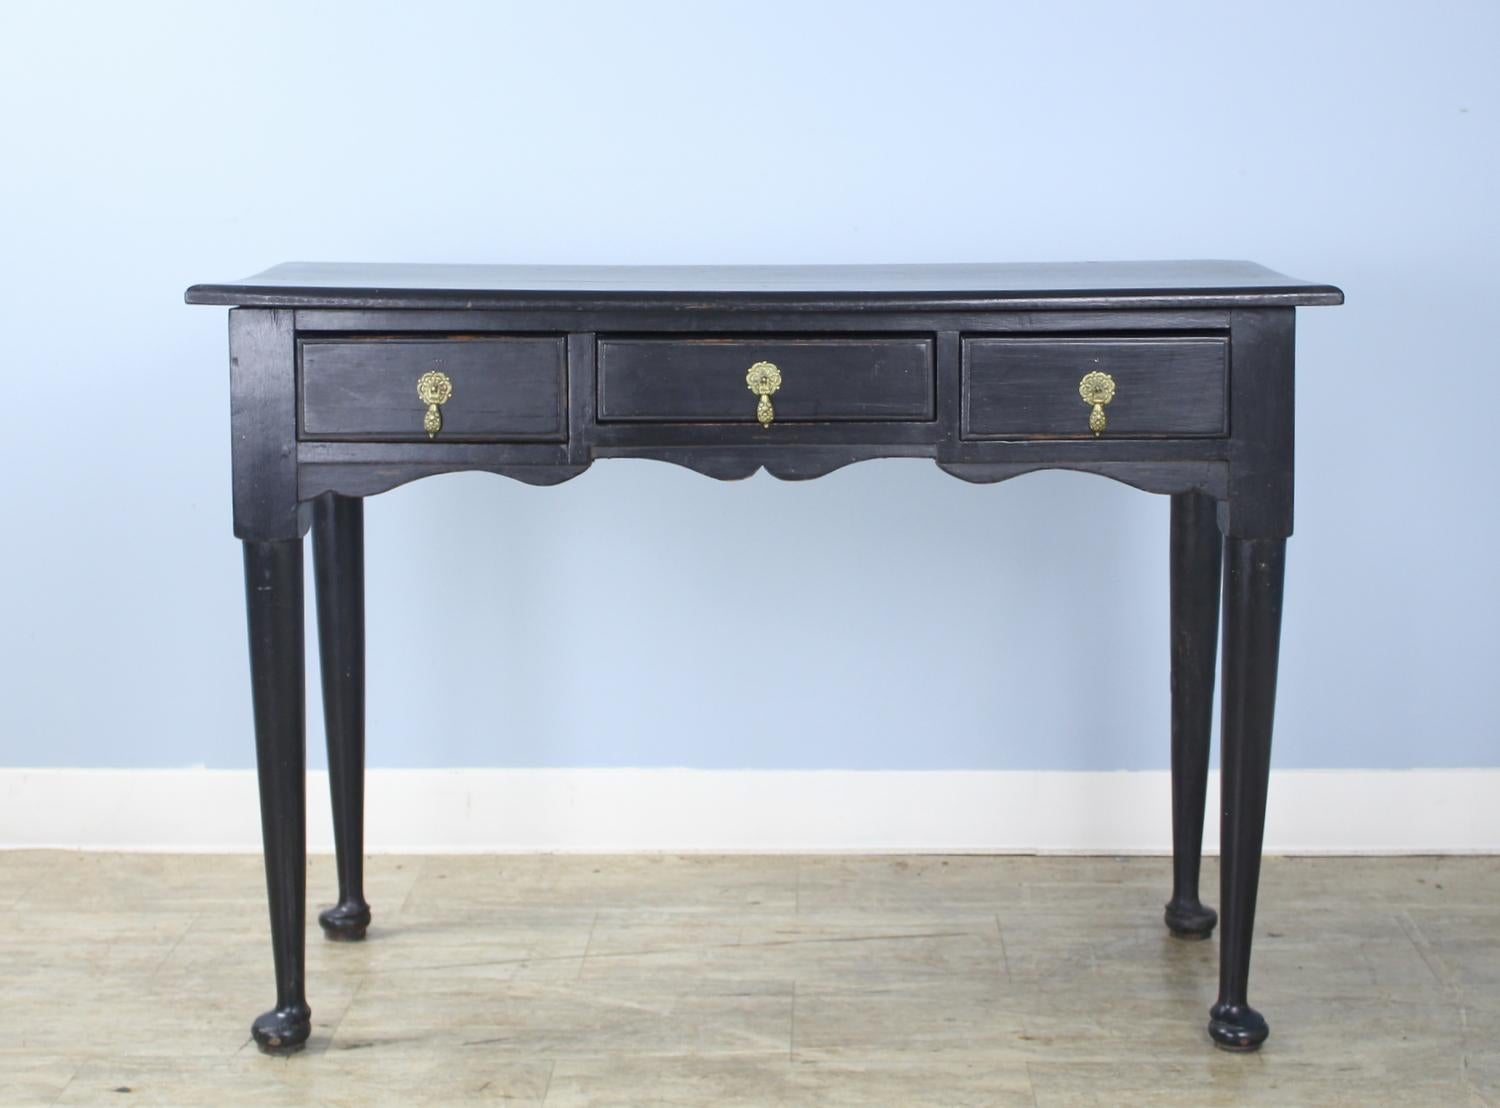 An elegant small serving table or hall table, newly painted in muted black with small amounts of faux distress. Brass tear drop escutcheons are period appropriate. Useful length and depth.